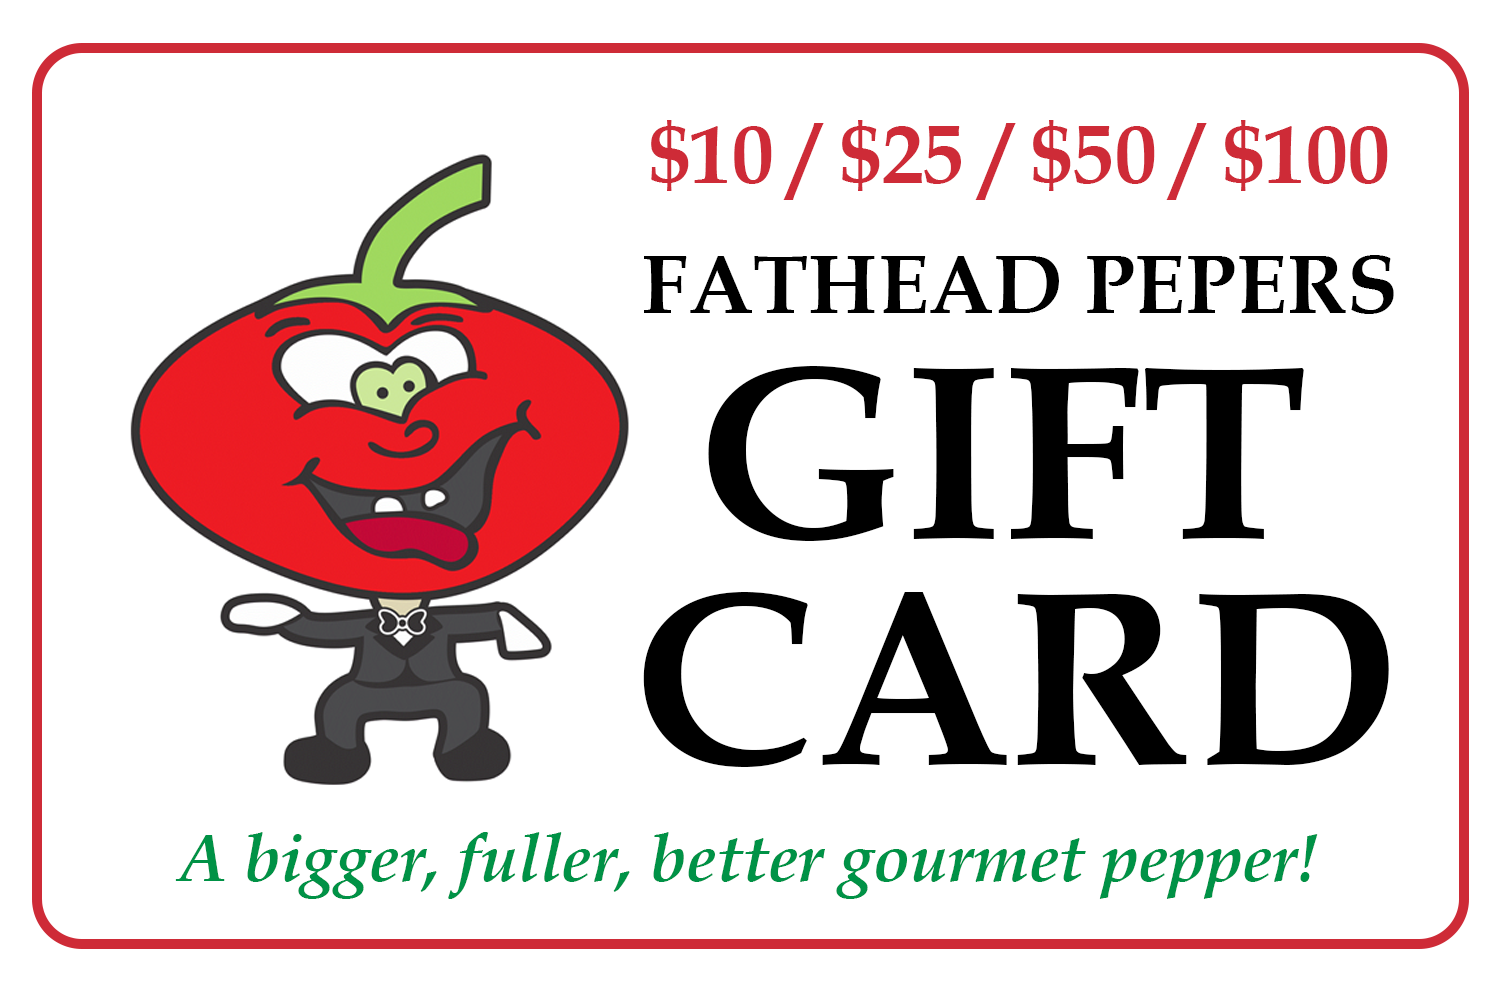 Fathead Peppers e-Gift Cards